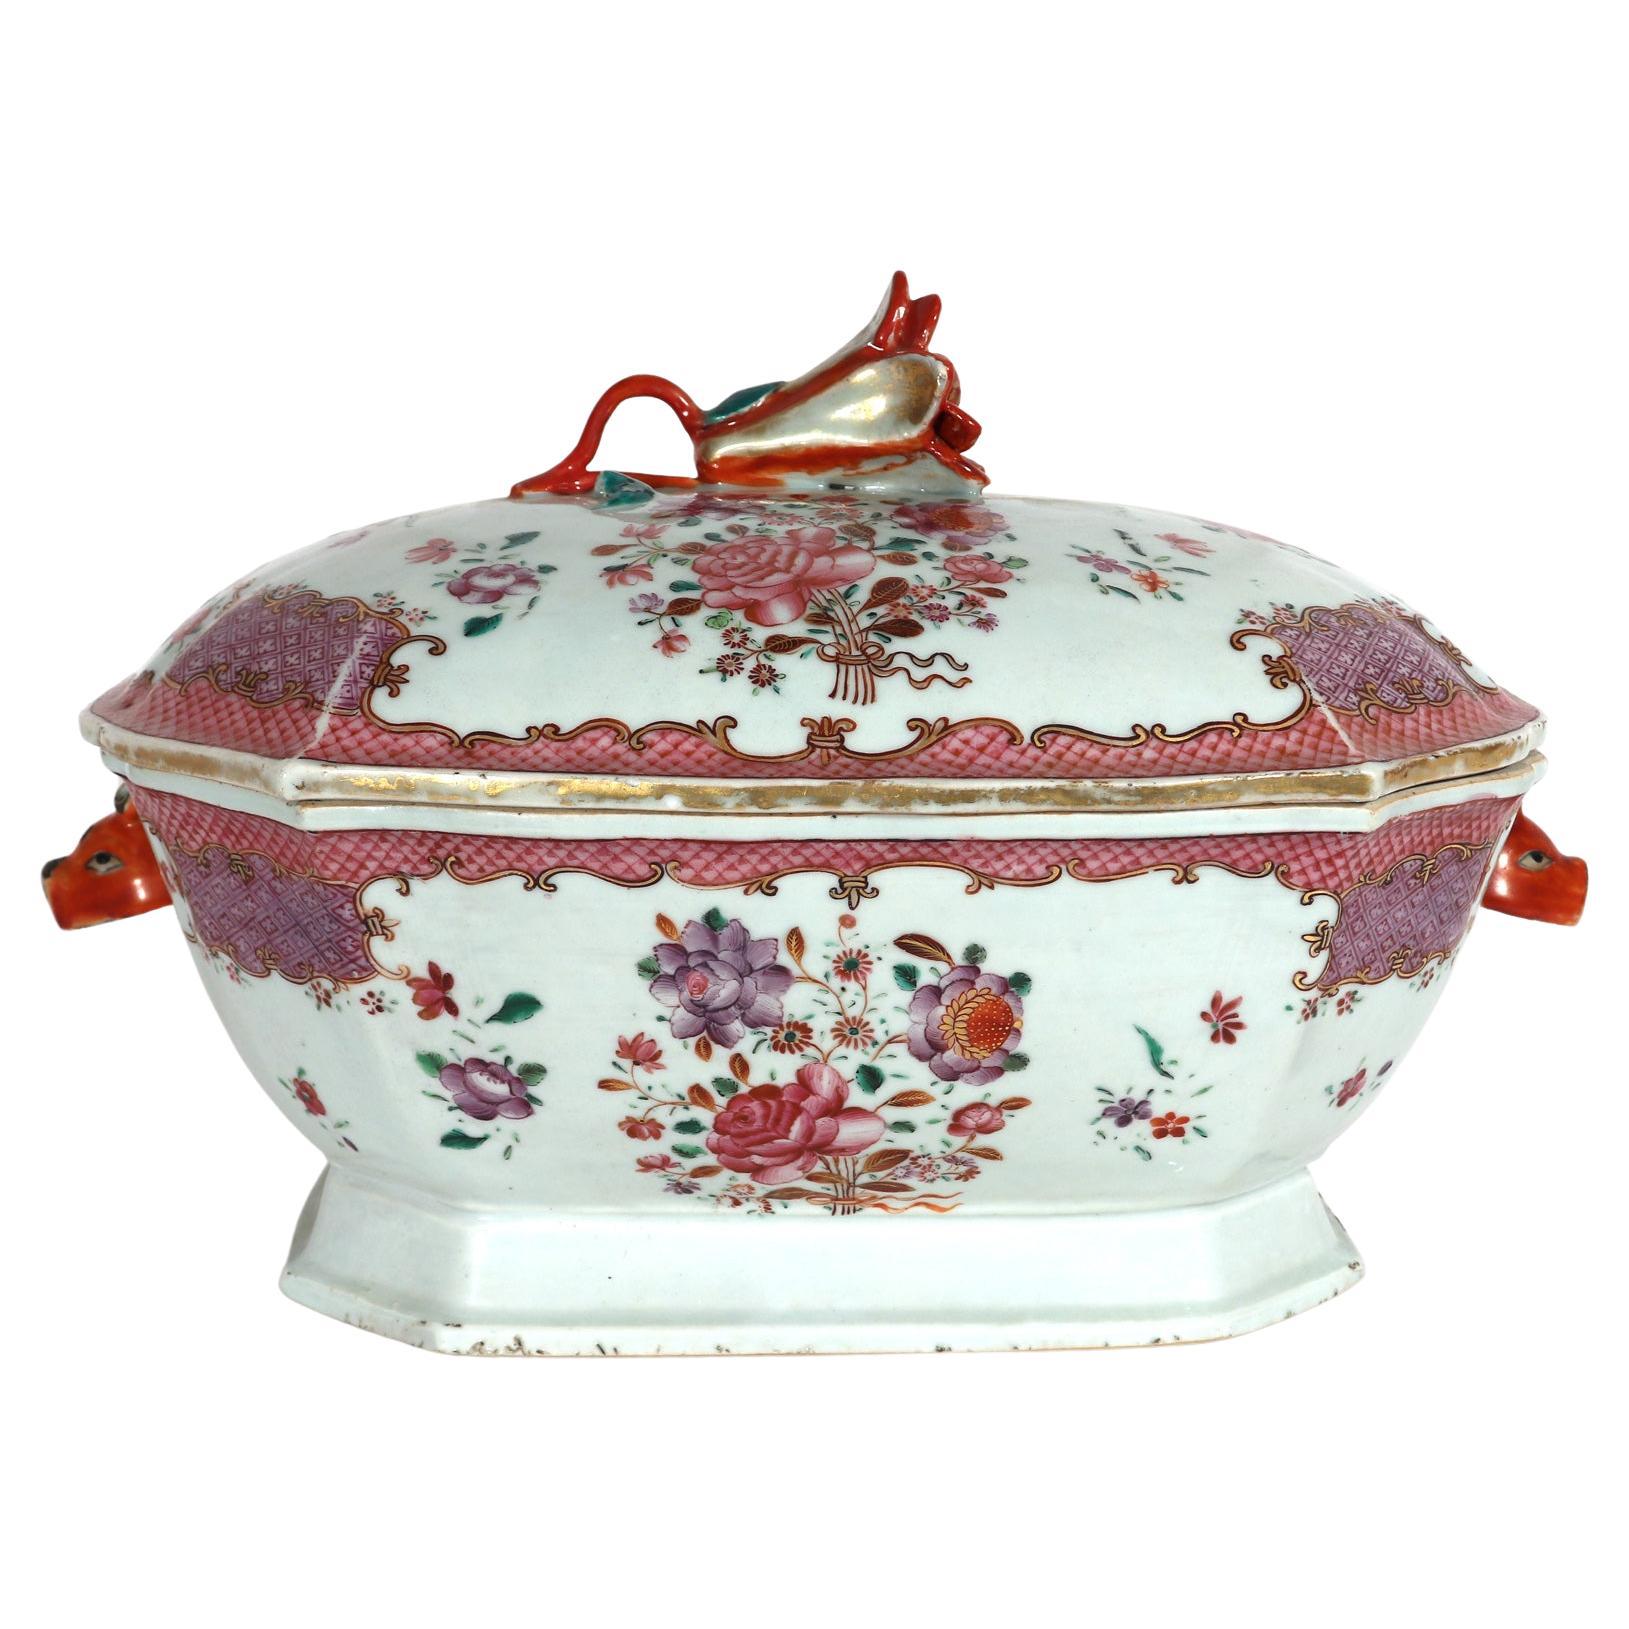 Chinese Export Porcelain Famille Rose Botanical Soup Tureen & Cover